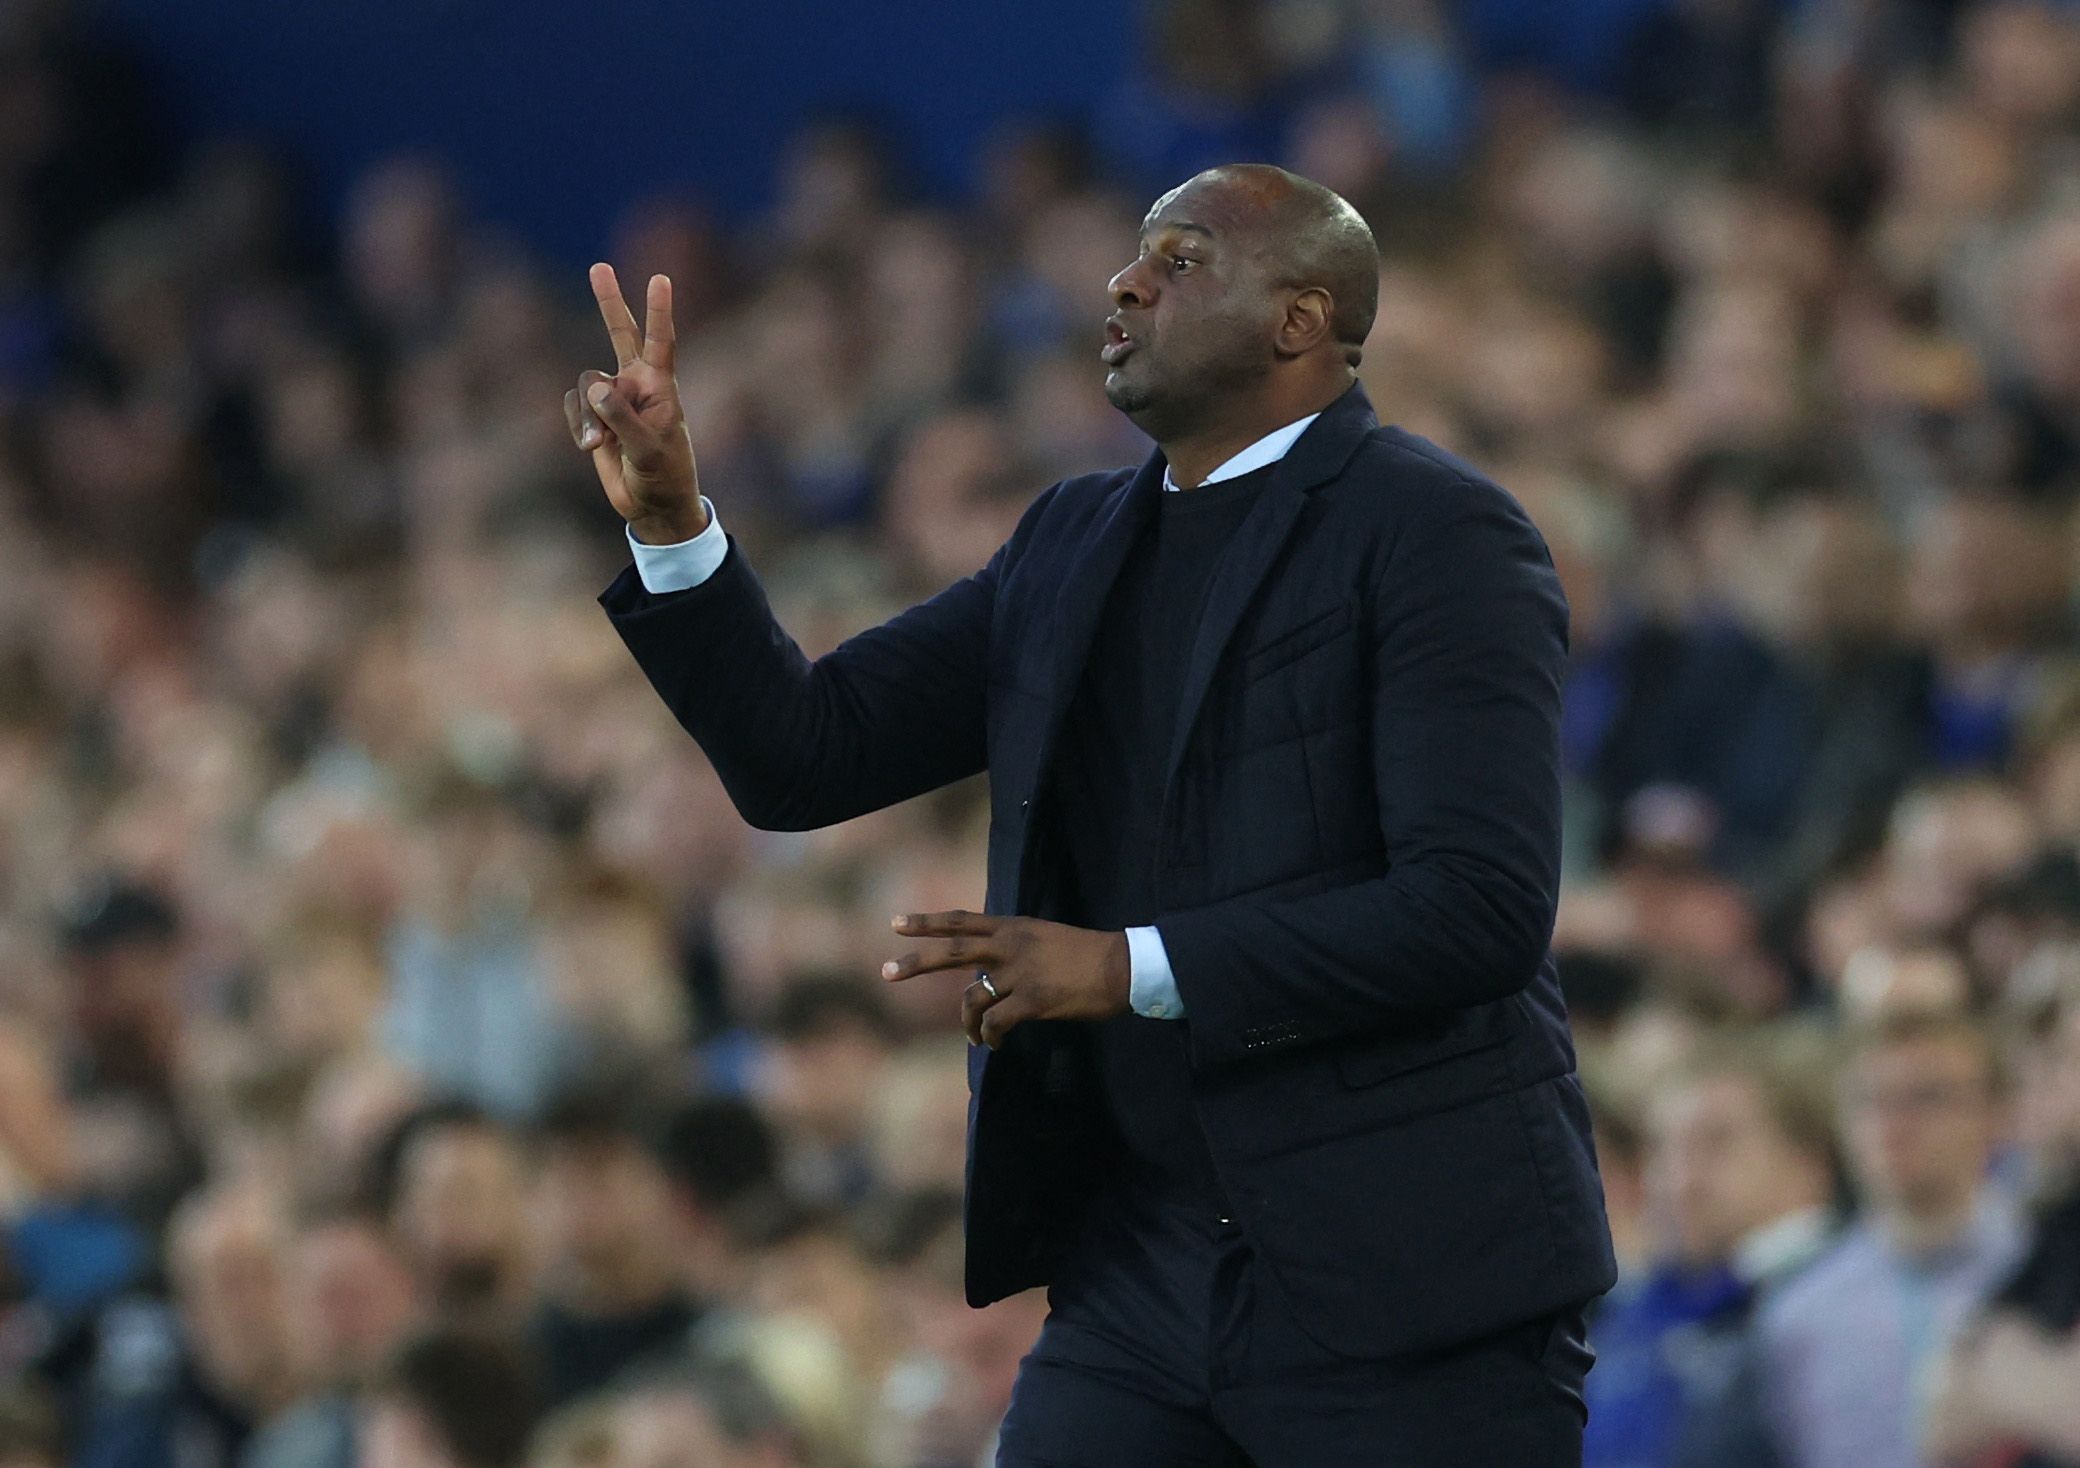 patrick-vieira-crystal-palace-team-news-manchester-united-ralf-rangnick-premier-league-ronaldo-pogba-injurySoccer Football - Premier League - Everton v Crystal Palace - Goodison Park, Liverpool, Britain - May 19, 2022 Crystal Palace manager Patrick Vieira reacts Action Images via Reuters/Carl Recine EDITORIAL USE ONLY. No use with unauthorized audio, video, data, fixture lists, club/league logos or 'live' services. Online in-match use limited to 75 images, no video emulation. No use in betting, 